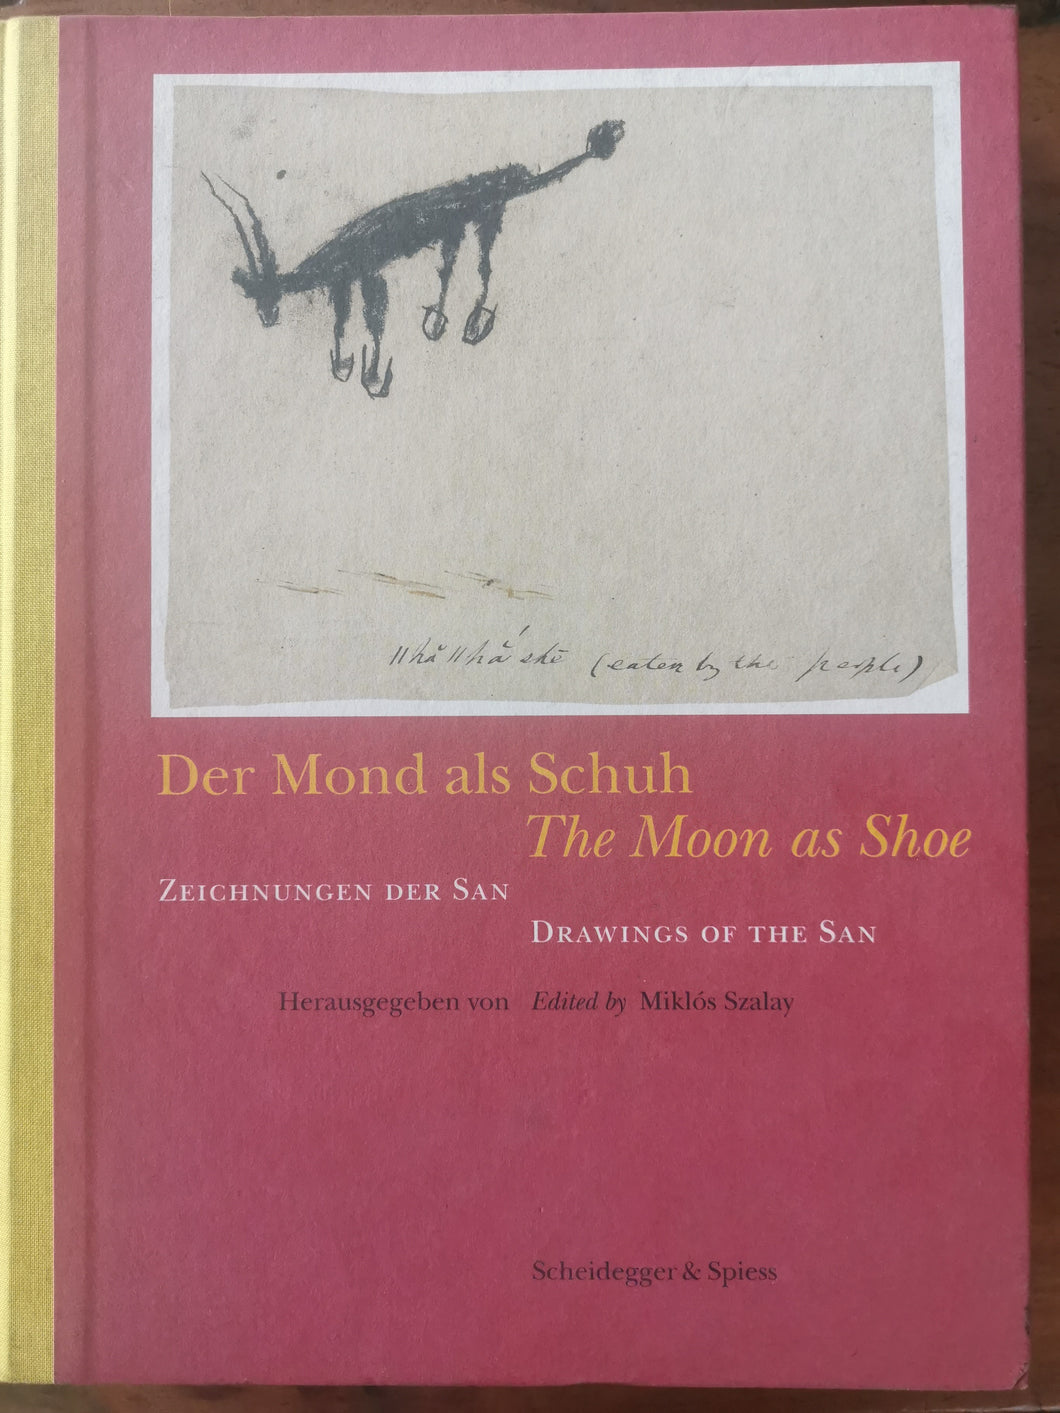 The Moon as Shoe - Drawings of the San